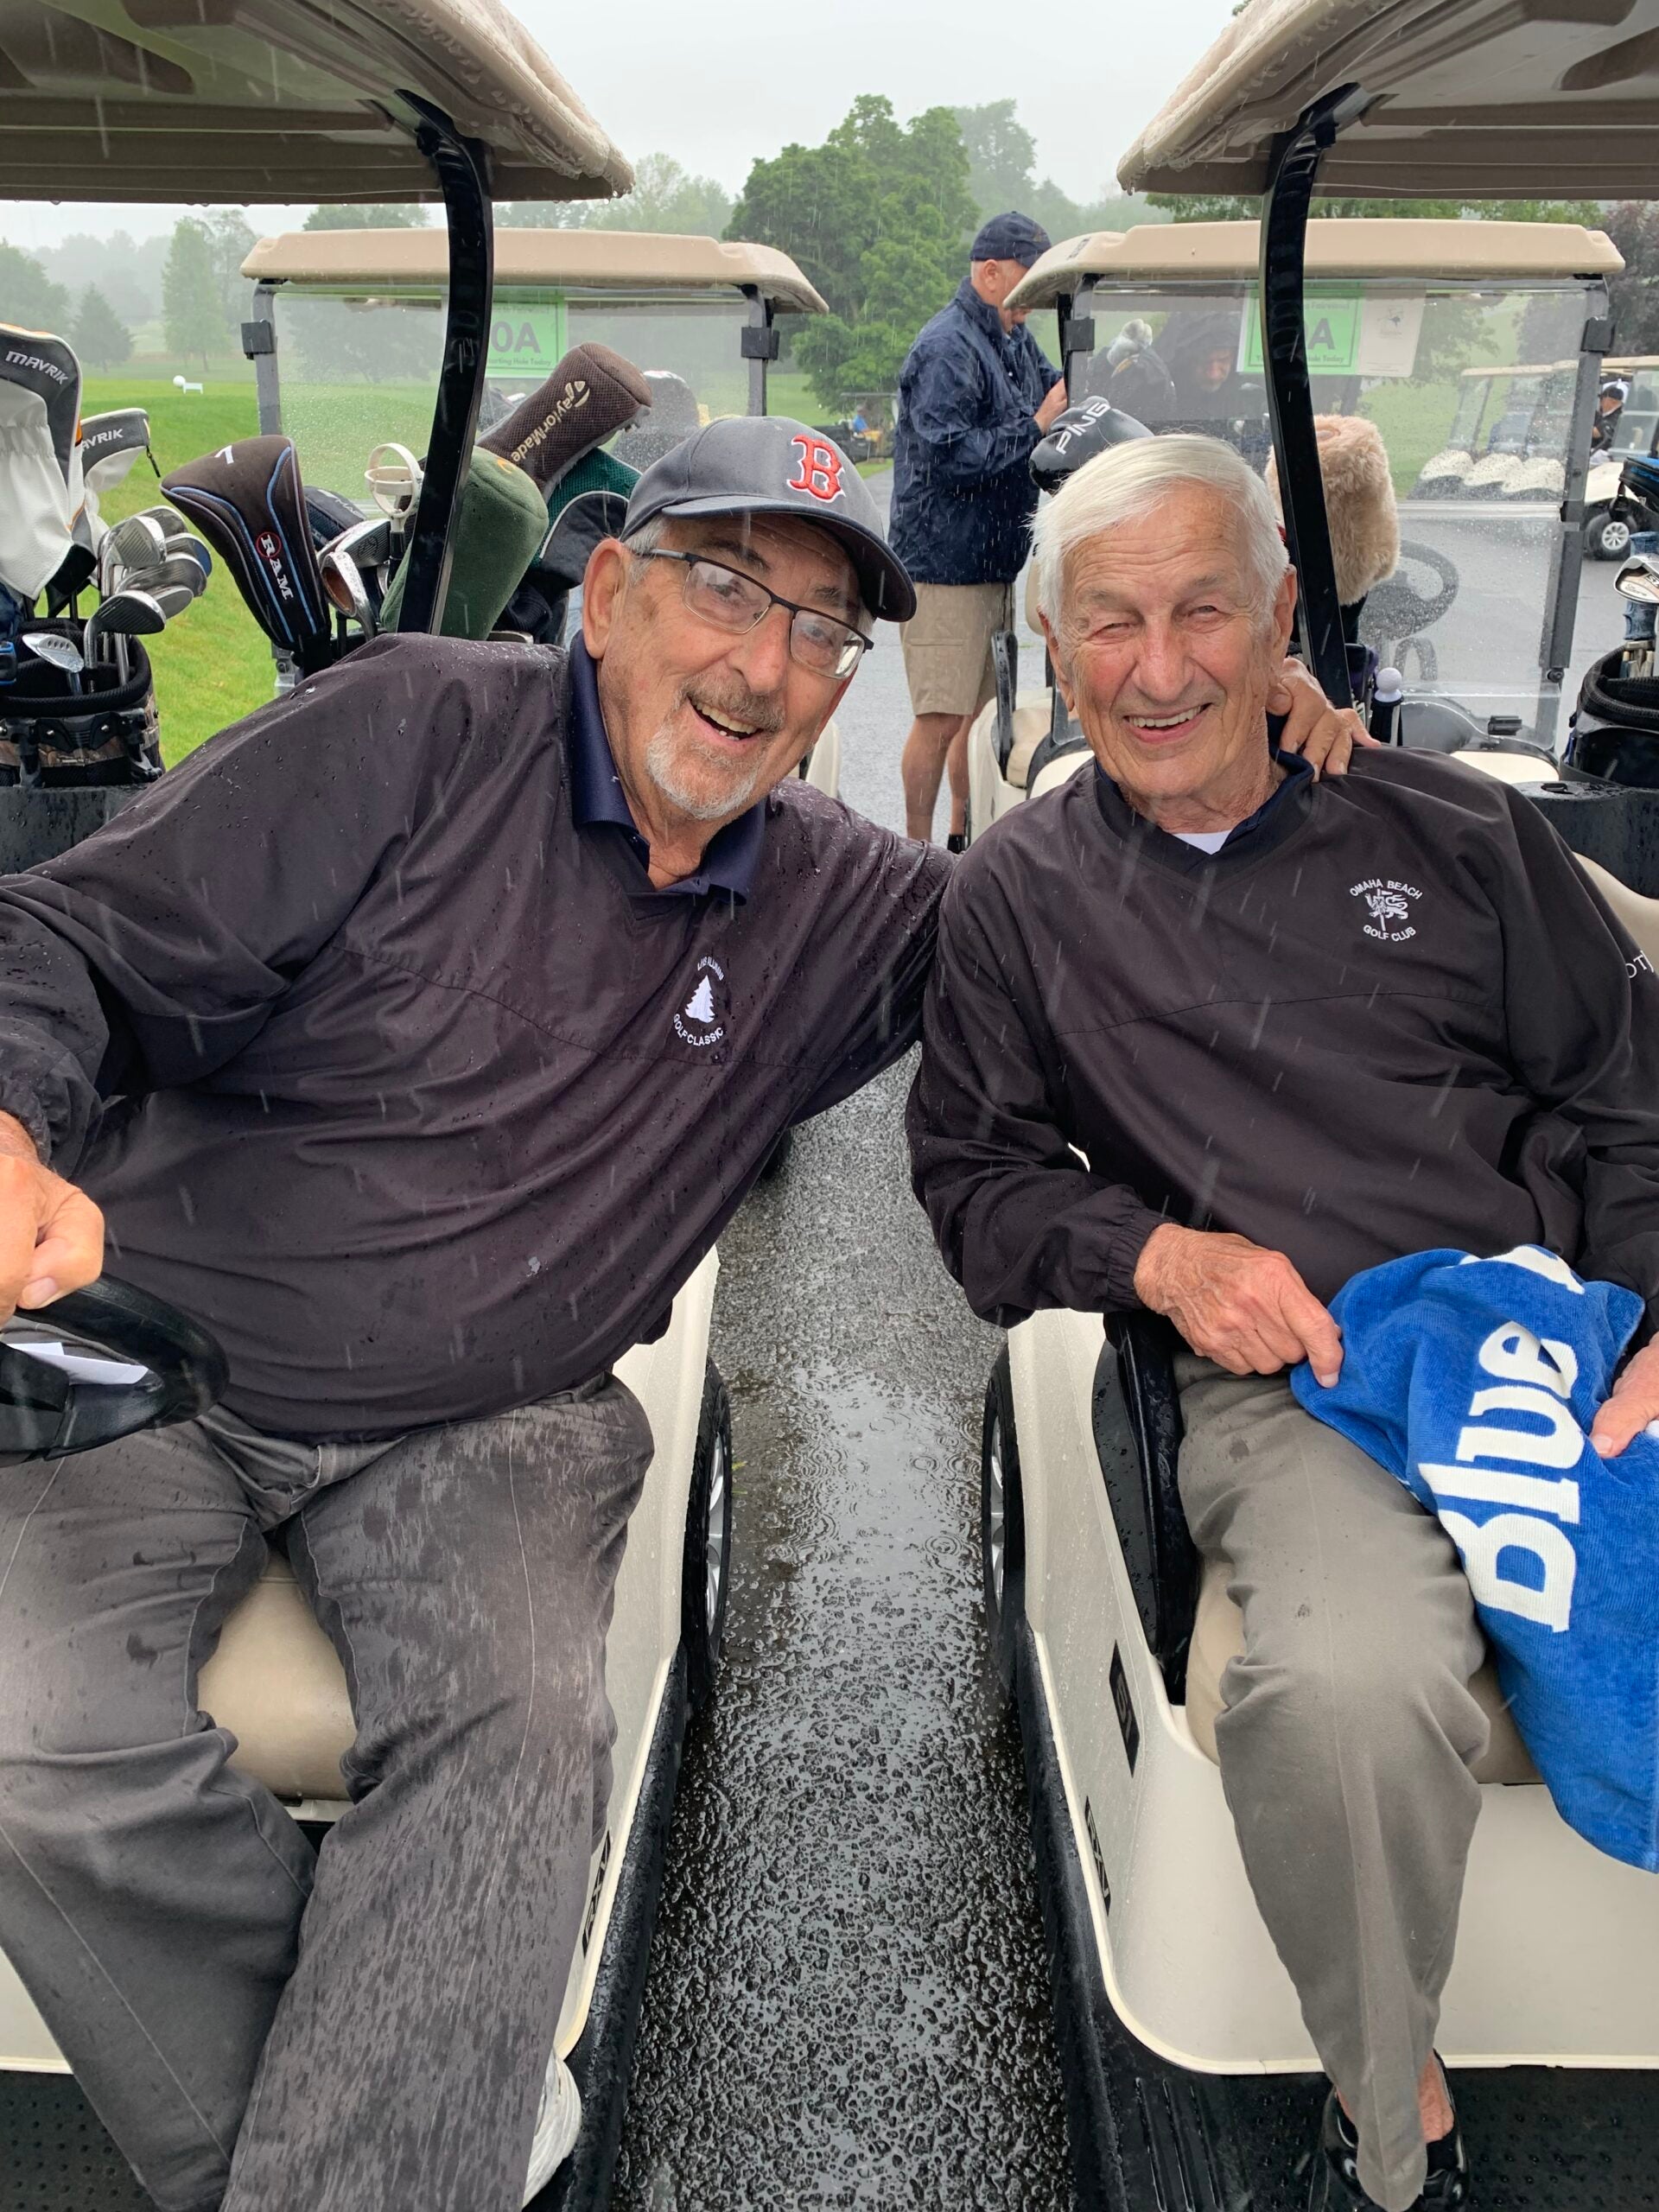 LVEP golf tournament participants sit in golf carts in the rain